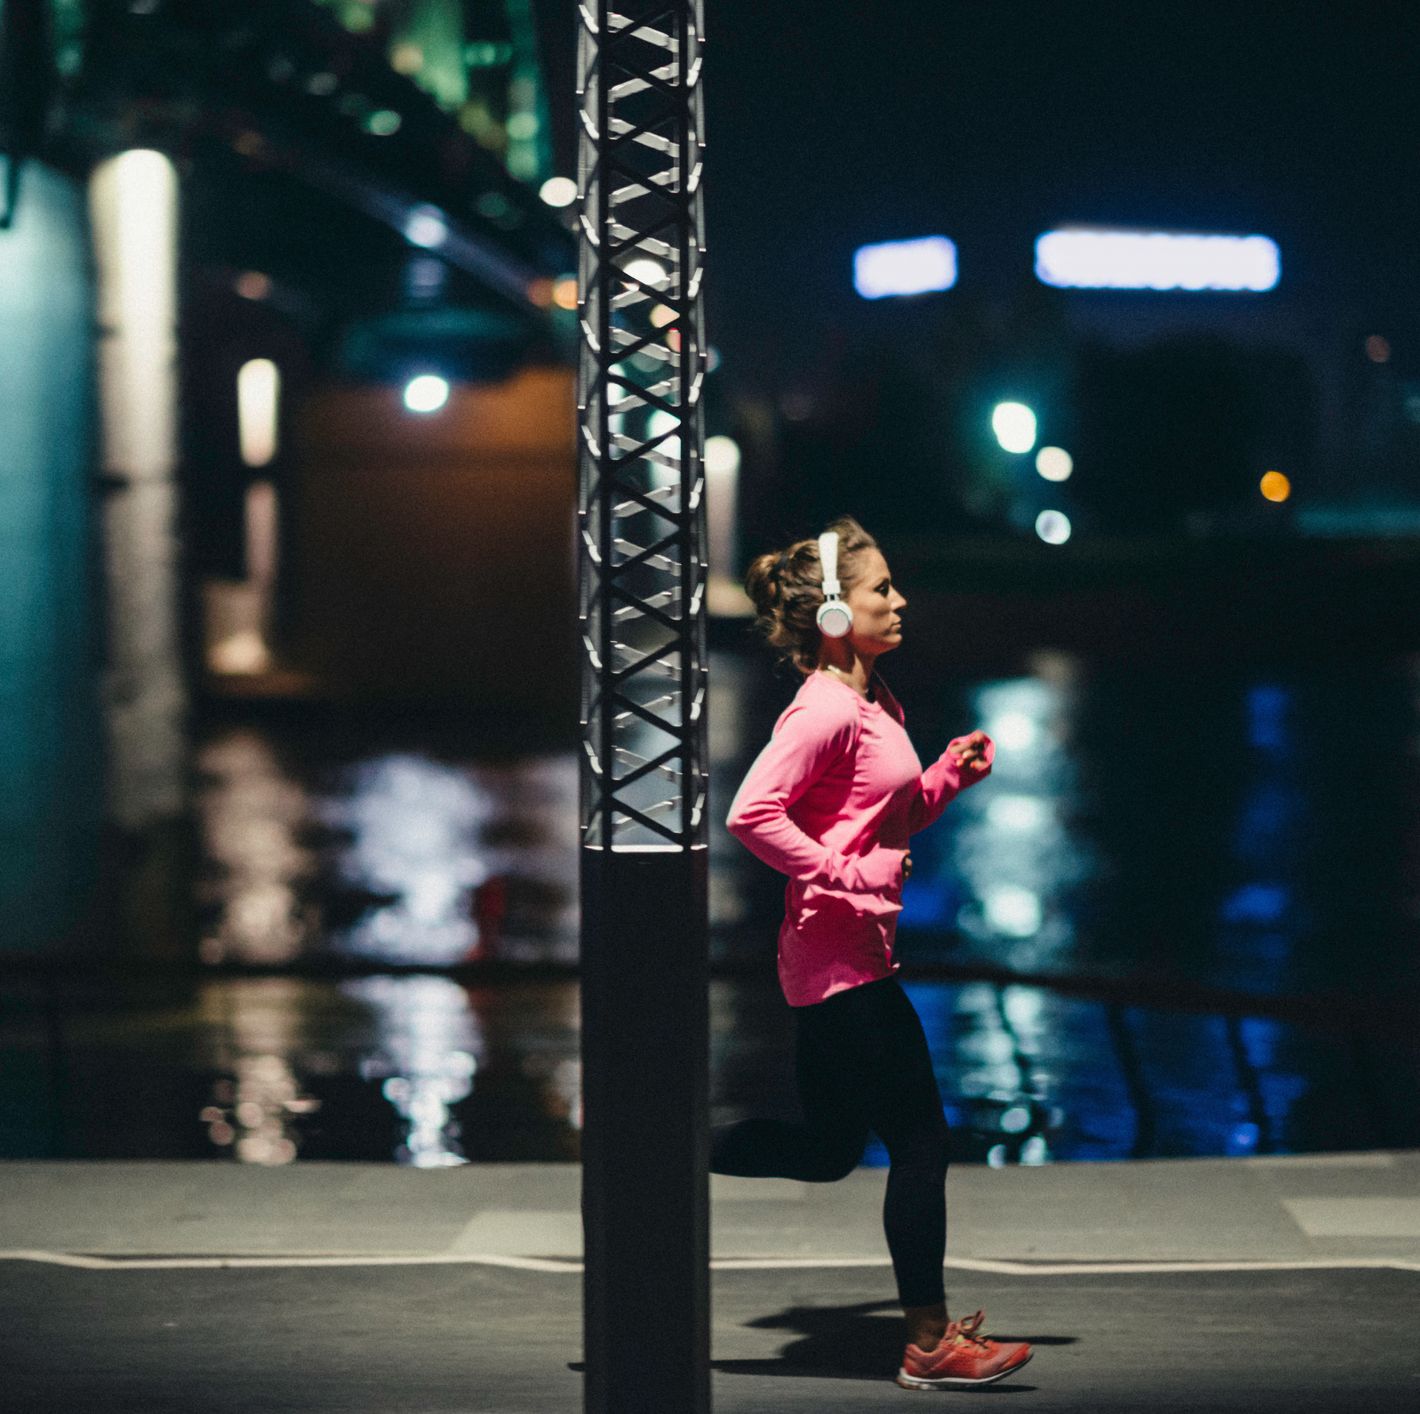 how to stay safe running in the dark